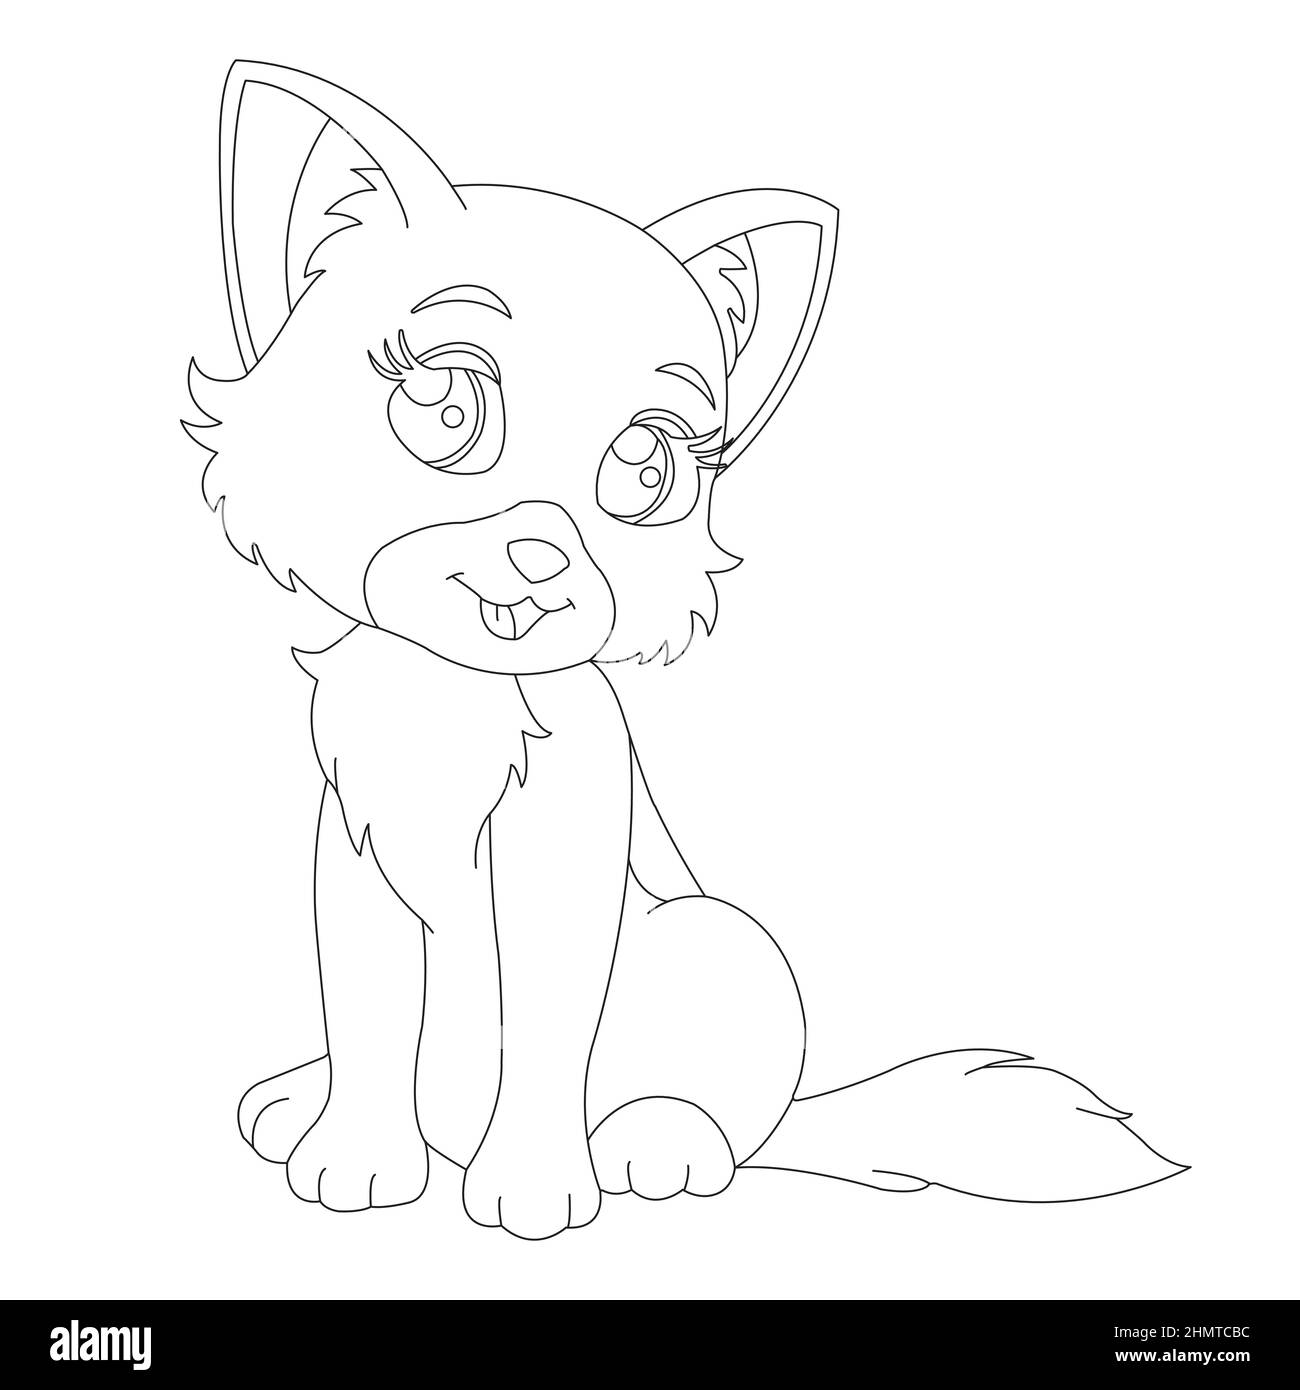 Coloring page outline of cute cat Animal Coloring page cartoon vector illustration Stock Vector